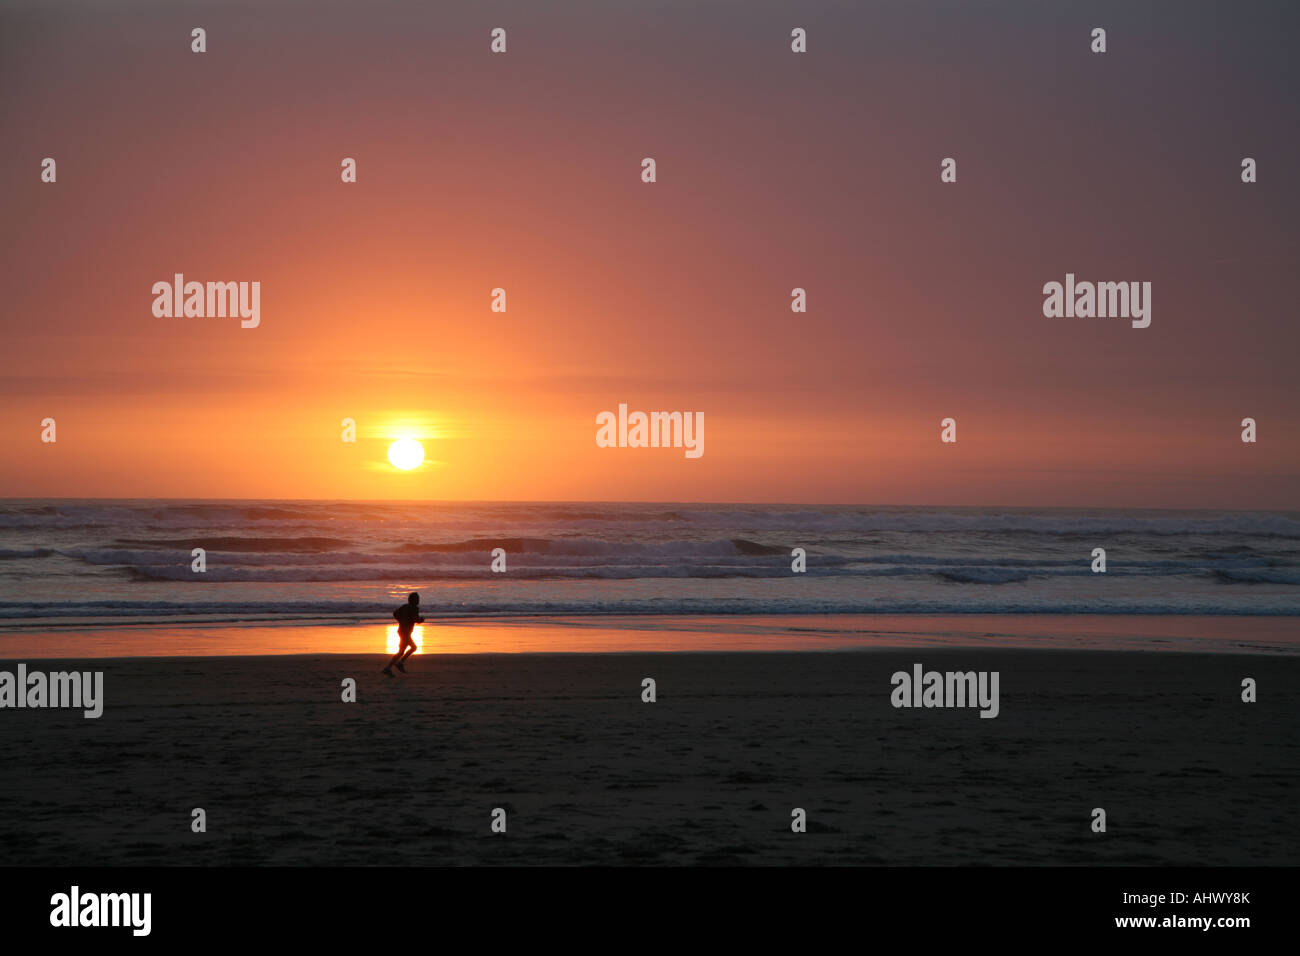 A single distant beach scene with a person on the Pacific Stock Photo